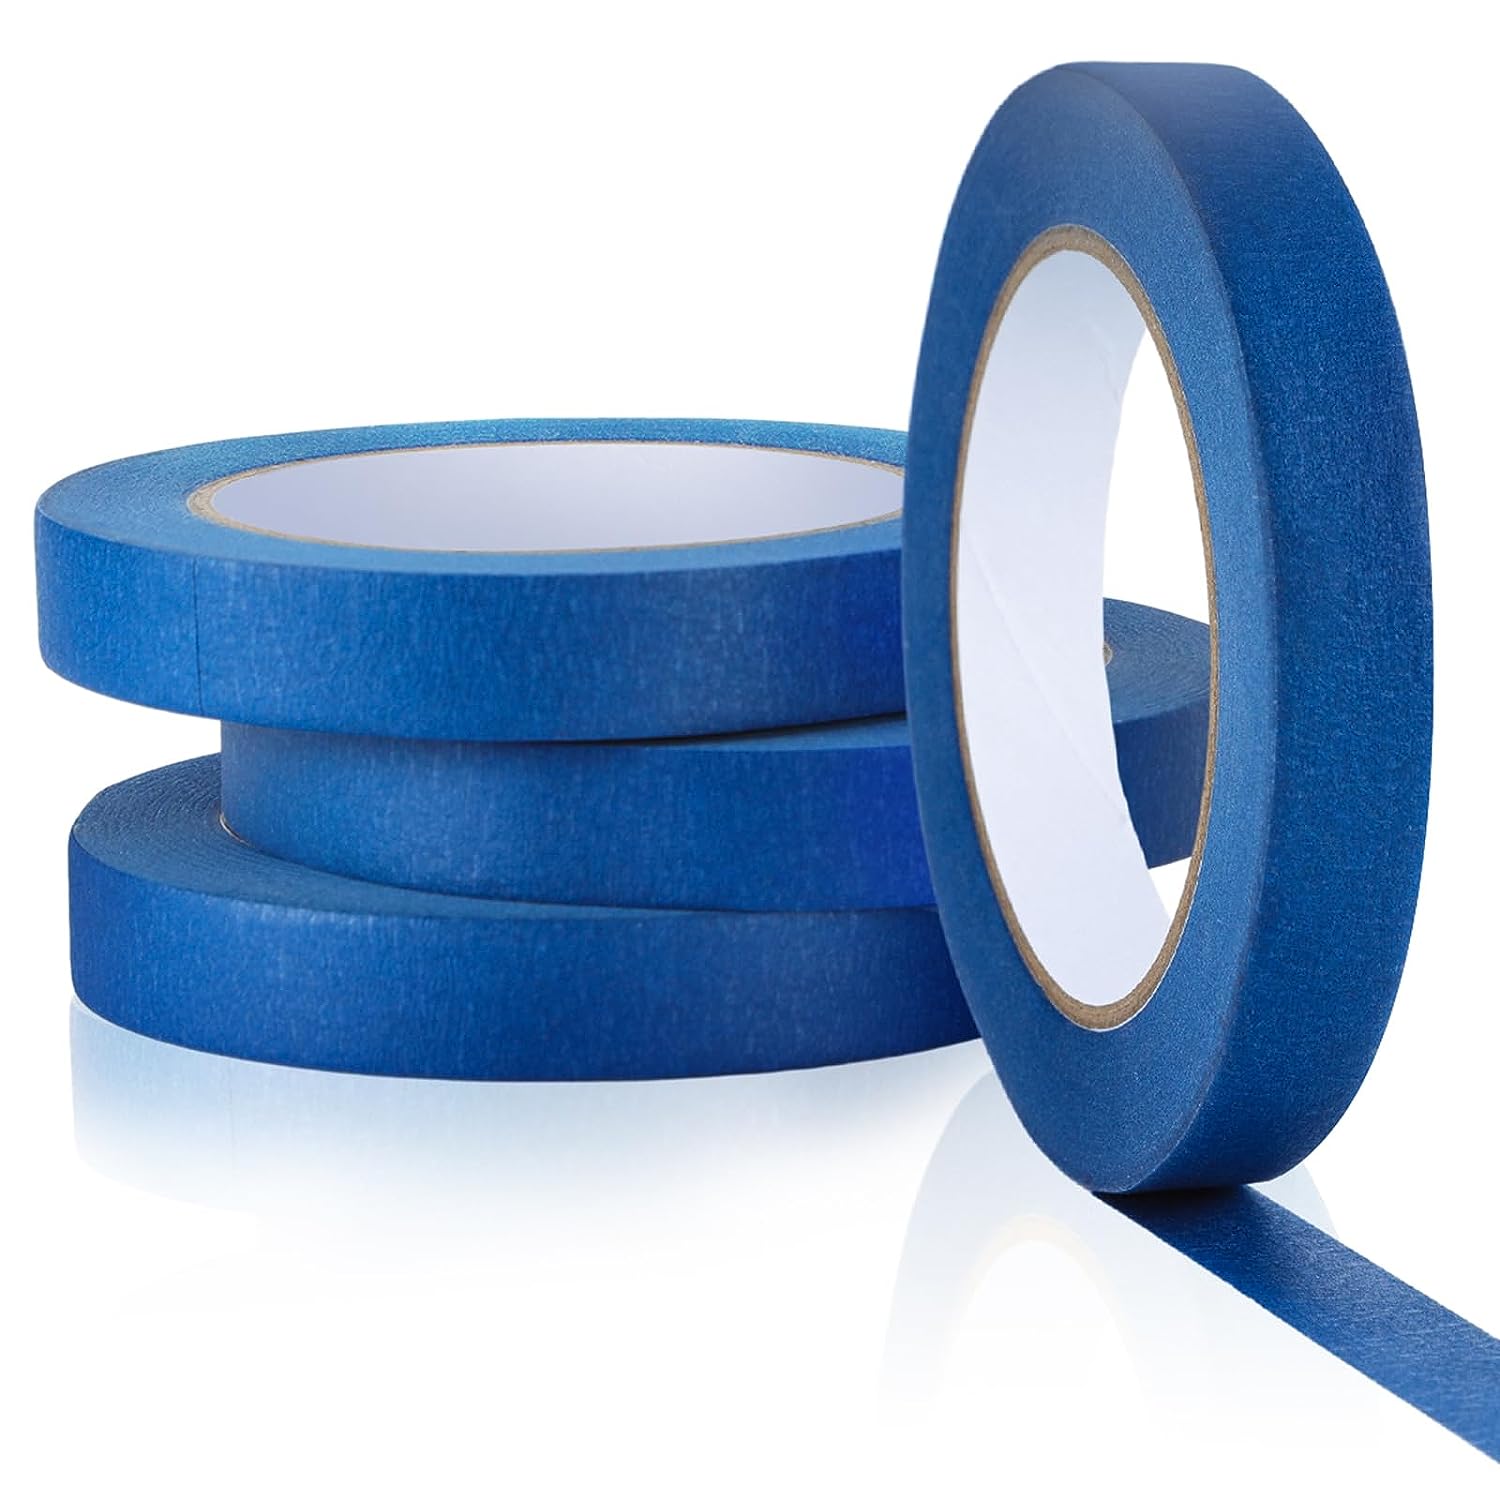 Blue Painters Tape Masking Tape Bulk, Blue Tape for Painting Automotive Walls Packing Removable Free Residue, Paint for Indoors & Outdoors, 0.7 Inches X 50 Yards, 4 Rolls,200 Yard in Total